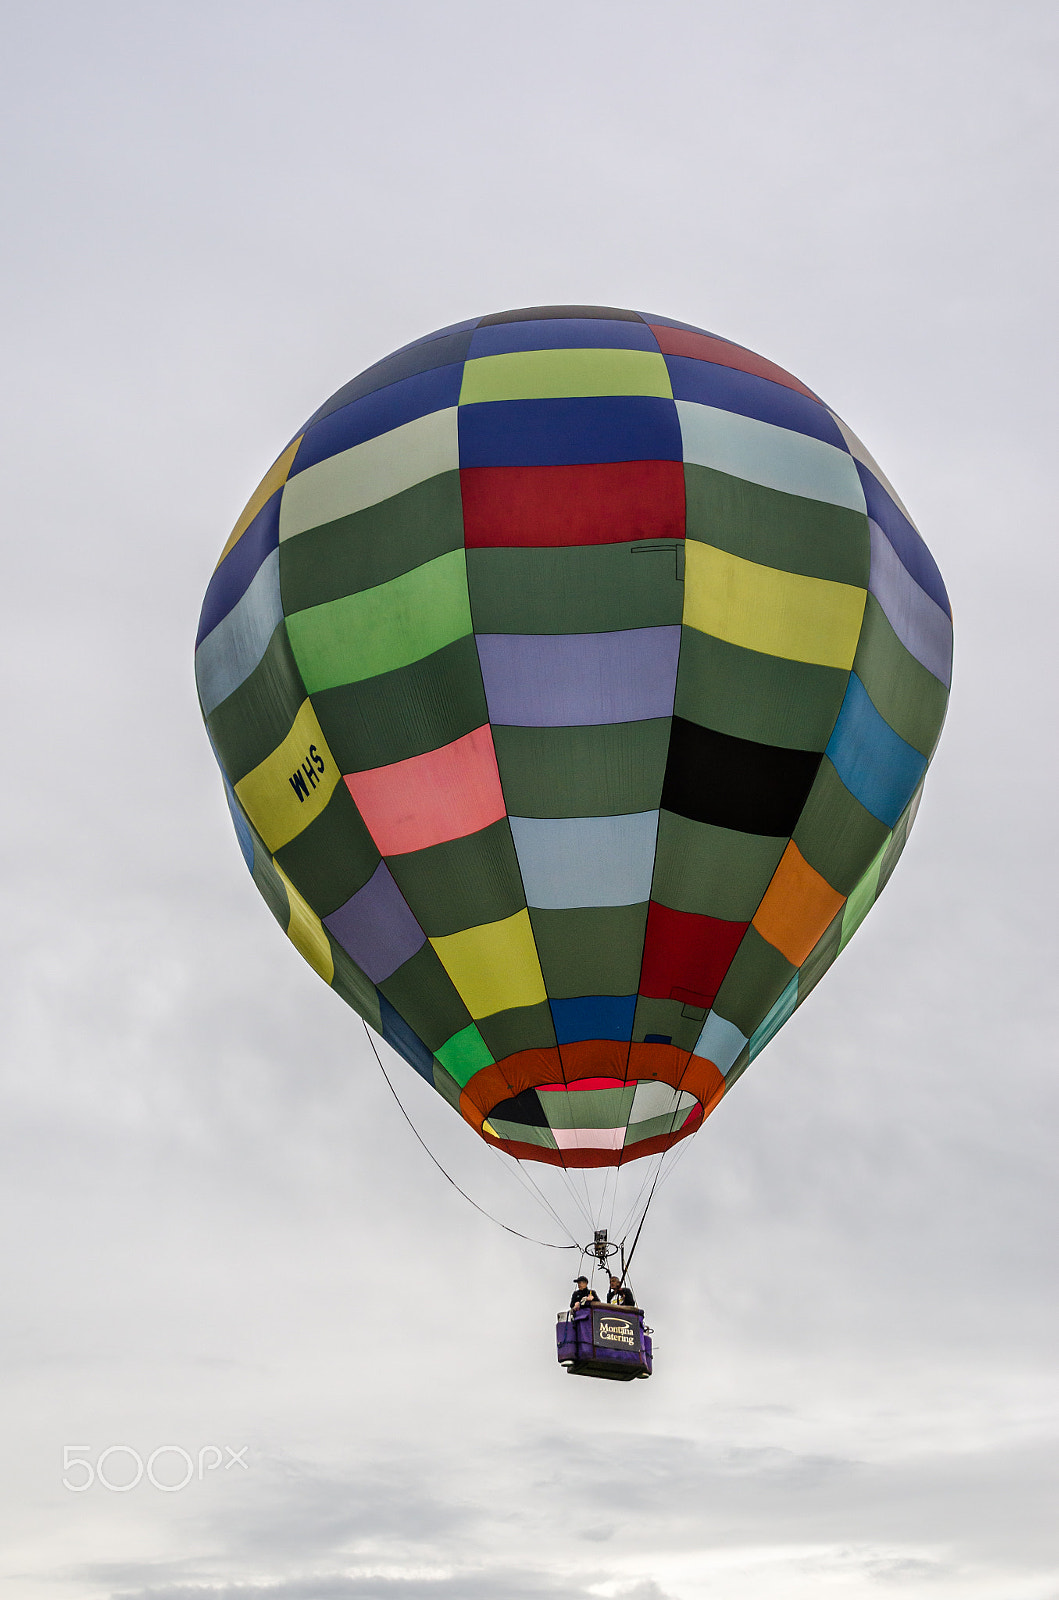 Sigma 18-200mm F3.5-6.3 DC sample photo. Hamilton, new zealand - march 26, 2017: balloons over waikato festival on march 26, 2017 in... photography